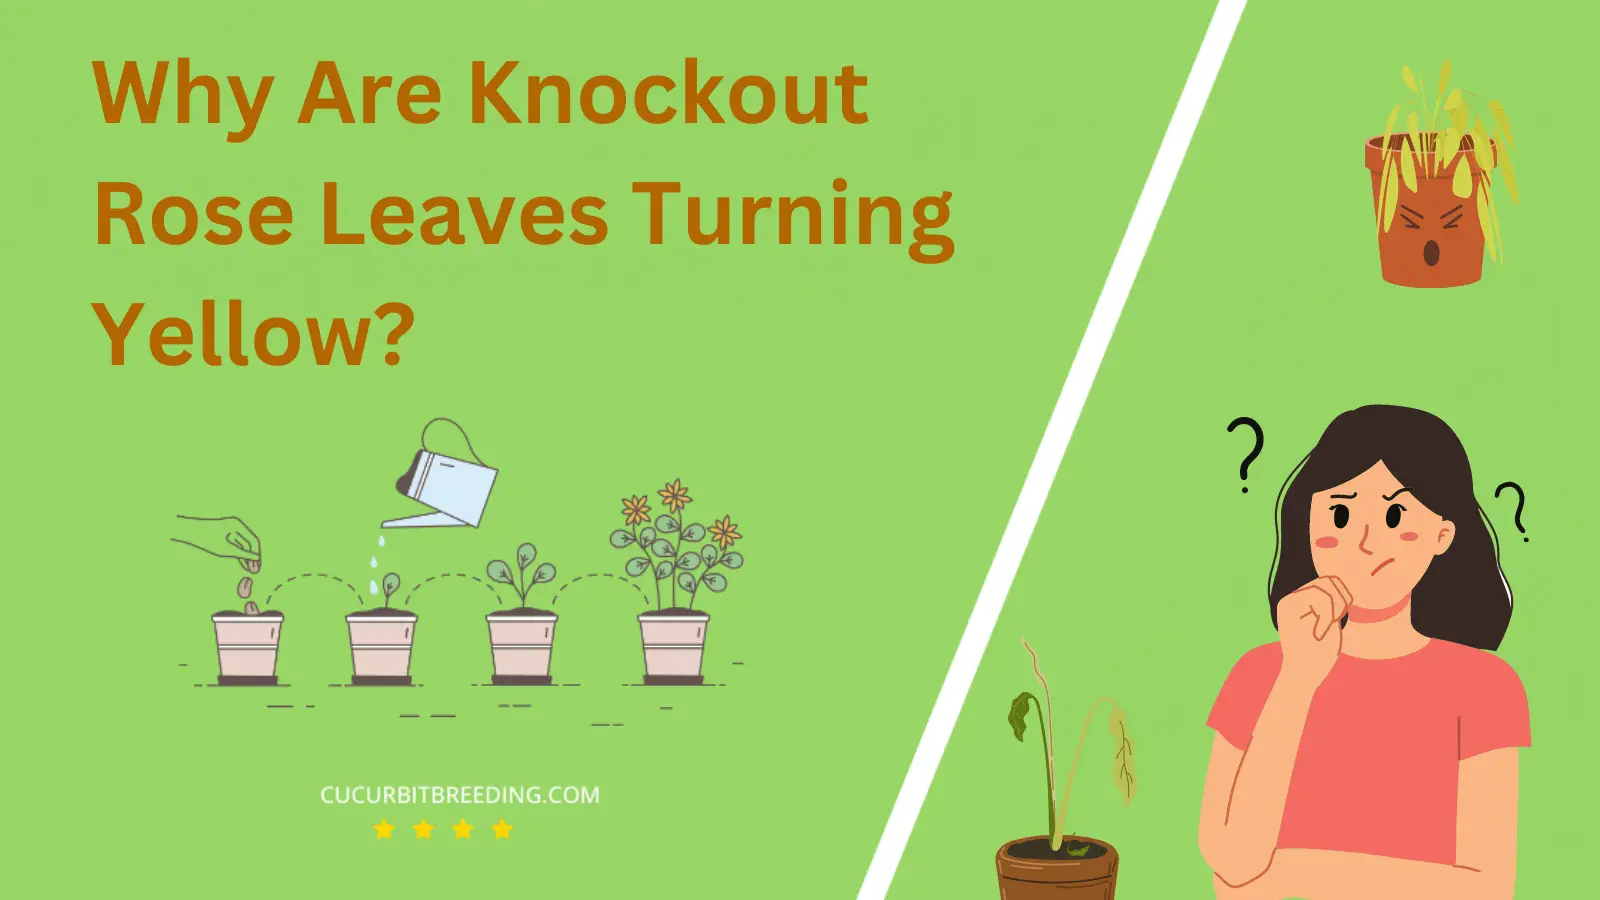 Why Are Knockout Rose Leaves Turning Yellow